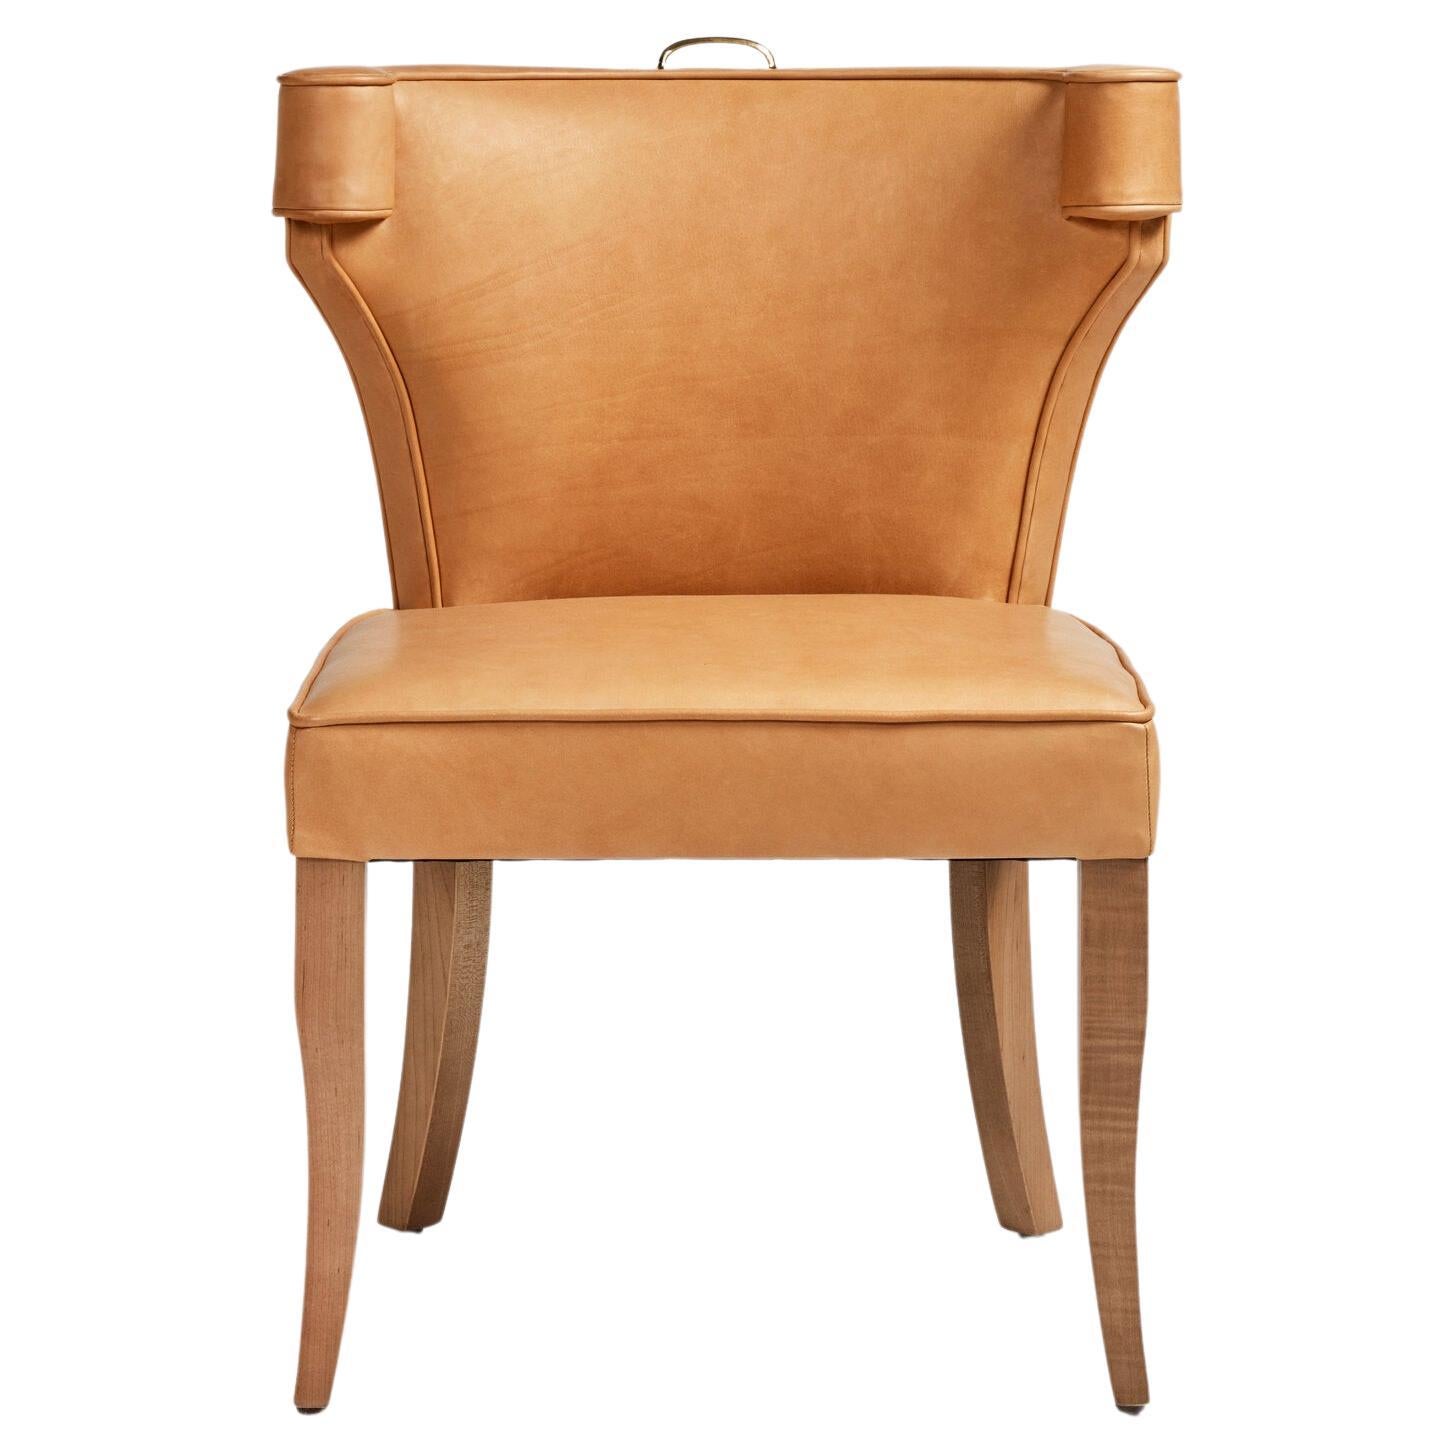 Traditional Upholstered Hale Dining Chair with Brass by Martin and Brockett